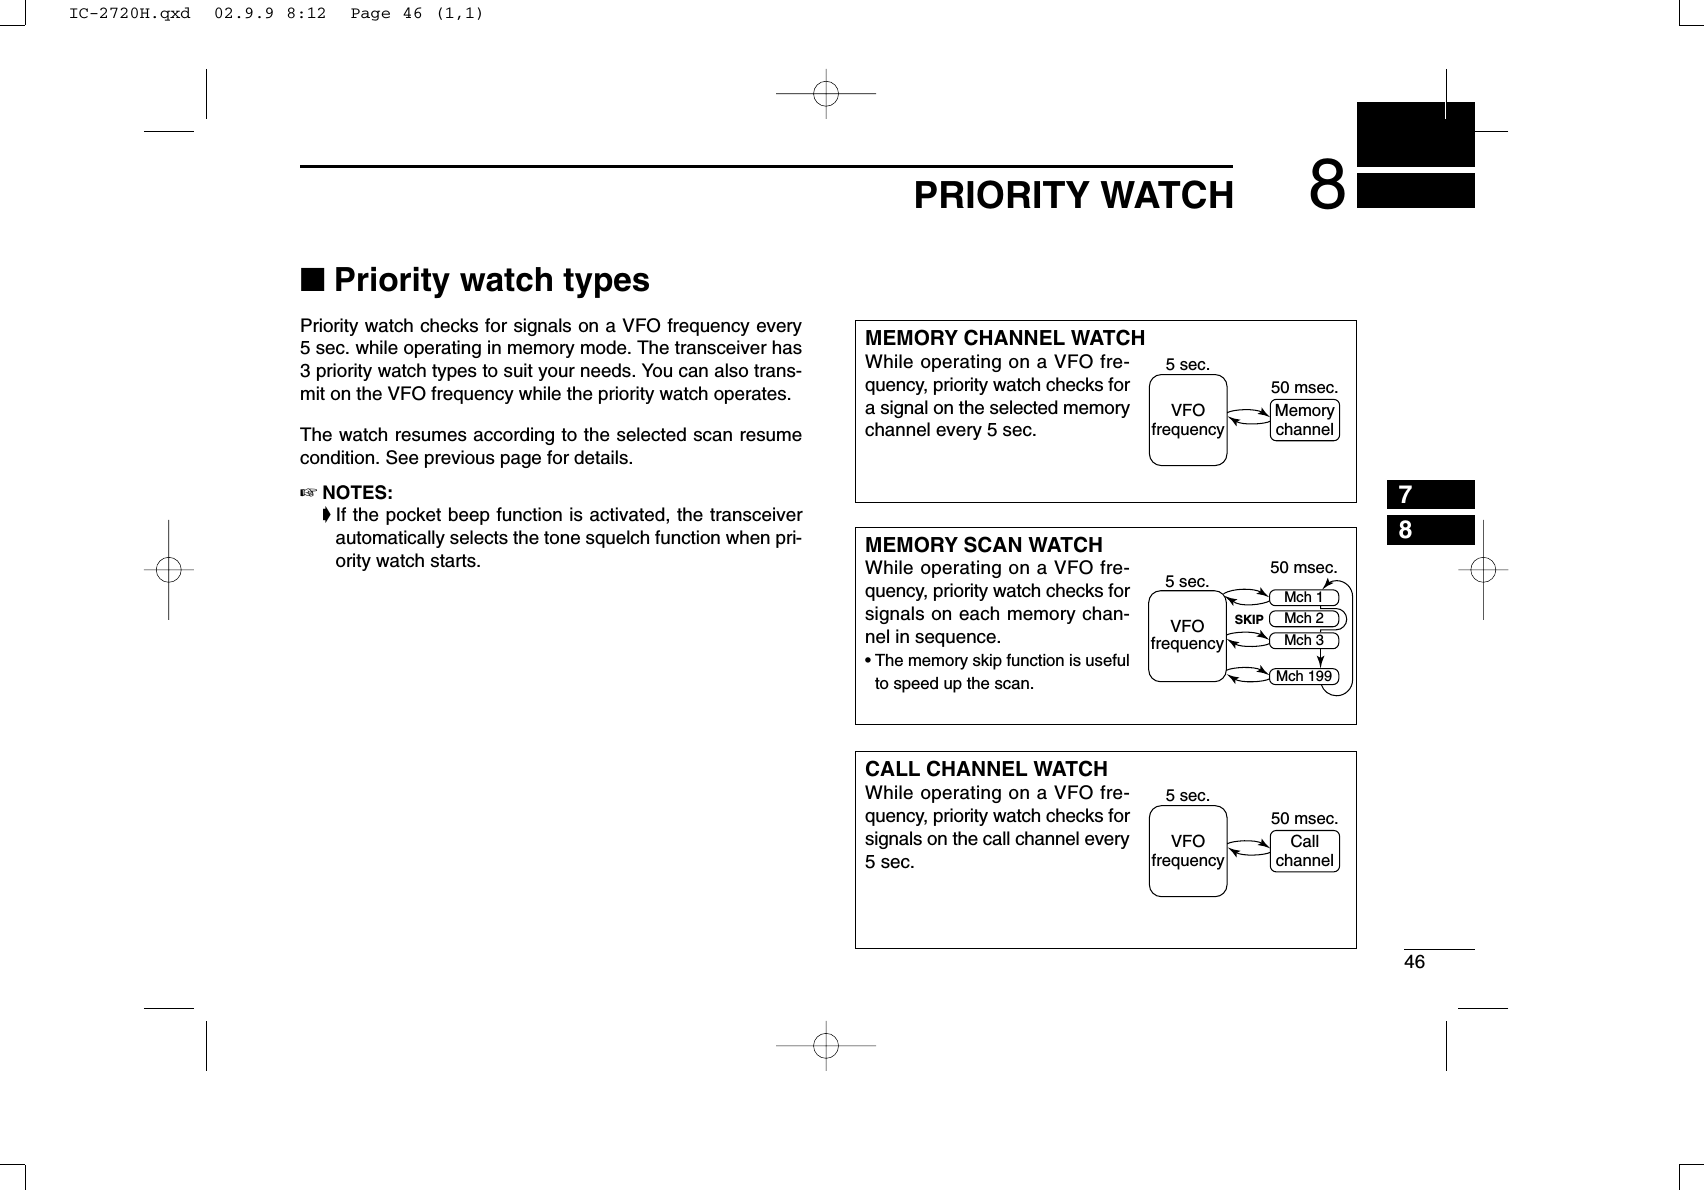 468PRIORITY WATCH78■Priority watch typesPriority watch checks for signals on a VFO frequency every5 sec. while operating in memory mode. The transceiver has3 priority watch types to suit your needs. You can also trans-mit on the VFO frequency while the priority watch operates.The watch resumes according to the selected scan resumecondition. See previous page for details.☞NOTES:➧If the pocket beep function is activated, the transceiverautomatically selects the tone squelch function when pri-ority watch starts.MEMORY CHANNEL WATCHWhile operating on a VFO fre-quency, priority watch checks fora signal on the selected memorychannel every 5 sec.MEMORY SCAN WATCHWhile operating on a VFO fre-quency, priority watch checks forsignals on each memory chan-nel in sequence.•The memory skip function is usefulto speed up the scan.CALL CHANNEL WATCHWhile operating on a VFO fre-quency, priority watch checks forsignals on the call channel every5 sec.5 sec.VFOfrequency50 msec.Memorychannel5 sec. 50 msec.VFOfrequencySKIPMch 1Mch 2Mch 3Mch 1995 sec.VFOfrequency50 msec.CallchannelIC-2720H.qxd  02.9.9 8:12  Page 46 (1,1)